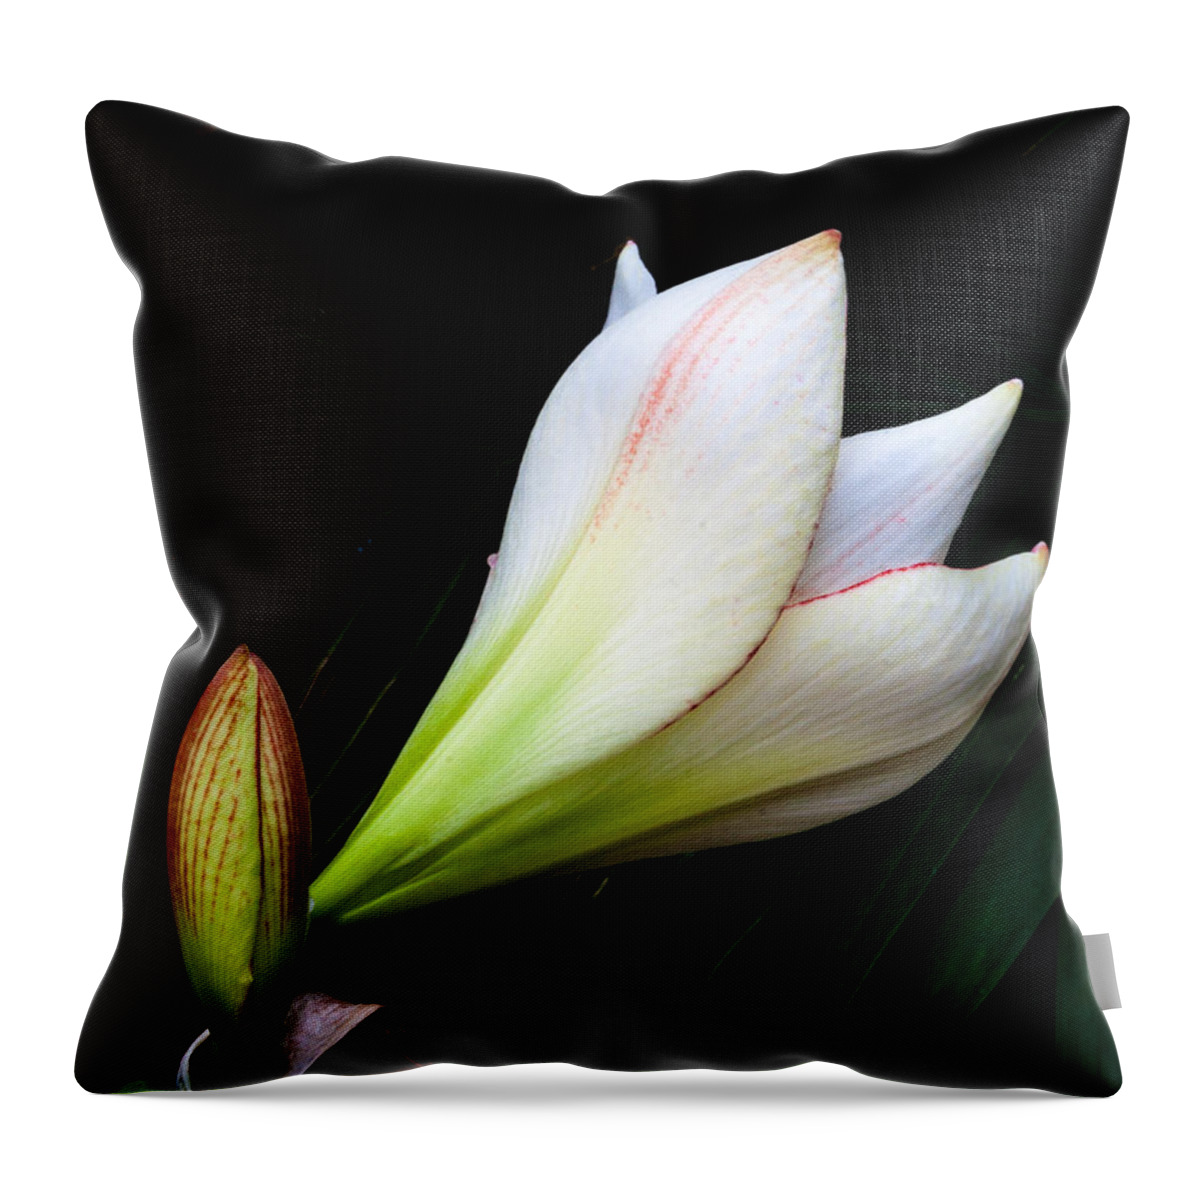 Flowers Throw Pillow featuring the photograph Refined Elegance by Stewart Helberg